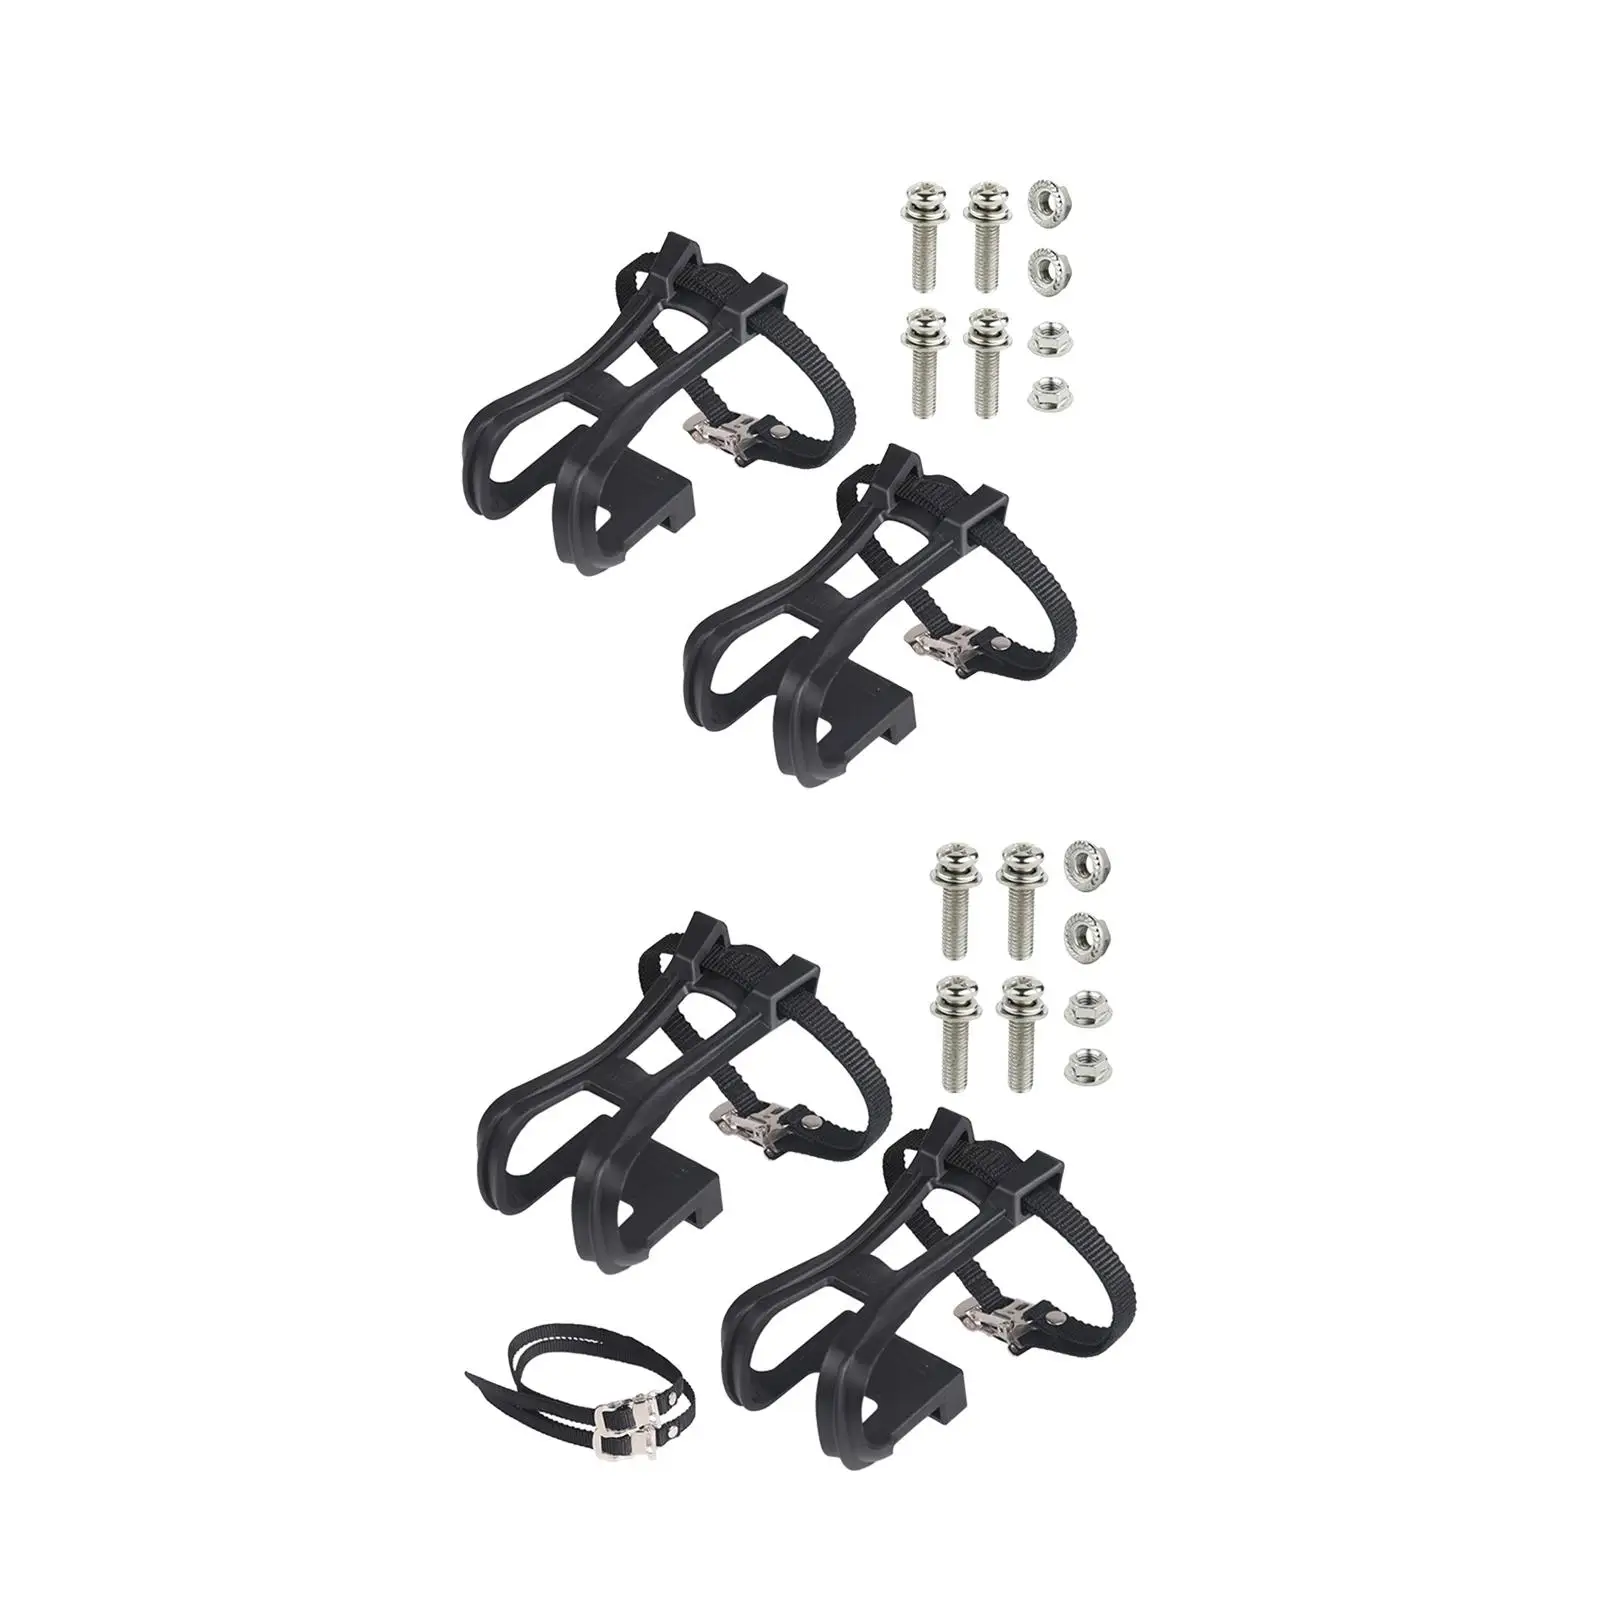 Bike Pedal Straps with Screws Pedal Clips Straps for Outdoor Road Bike BMX